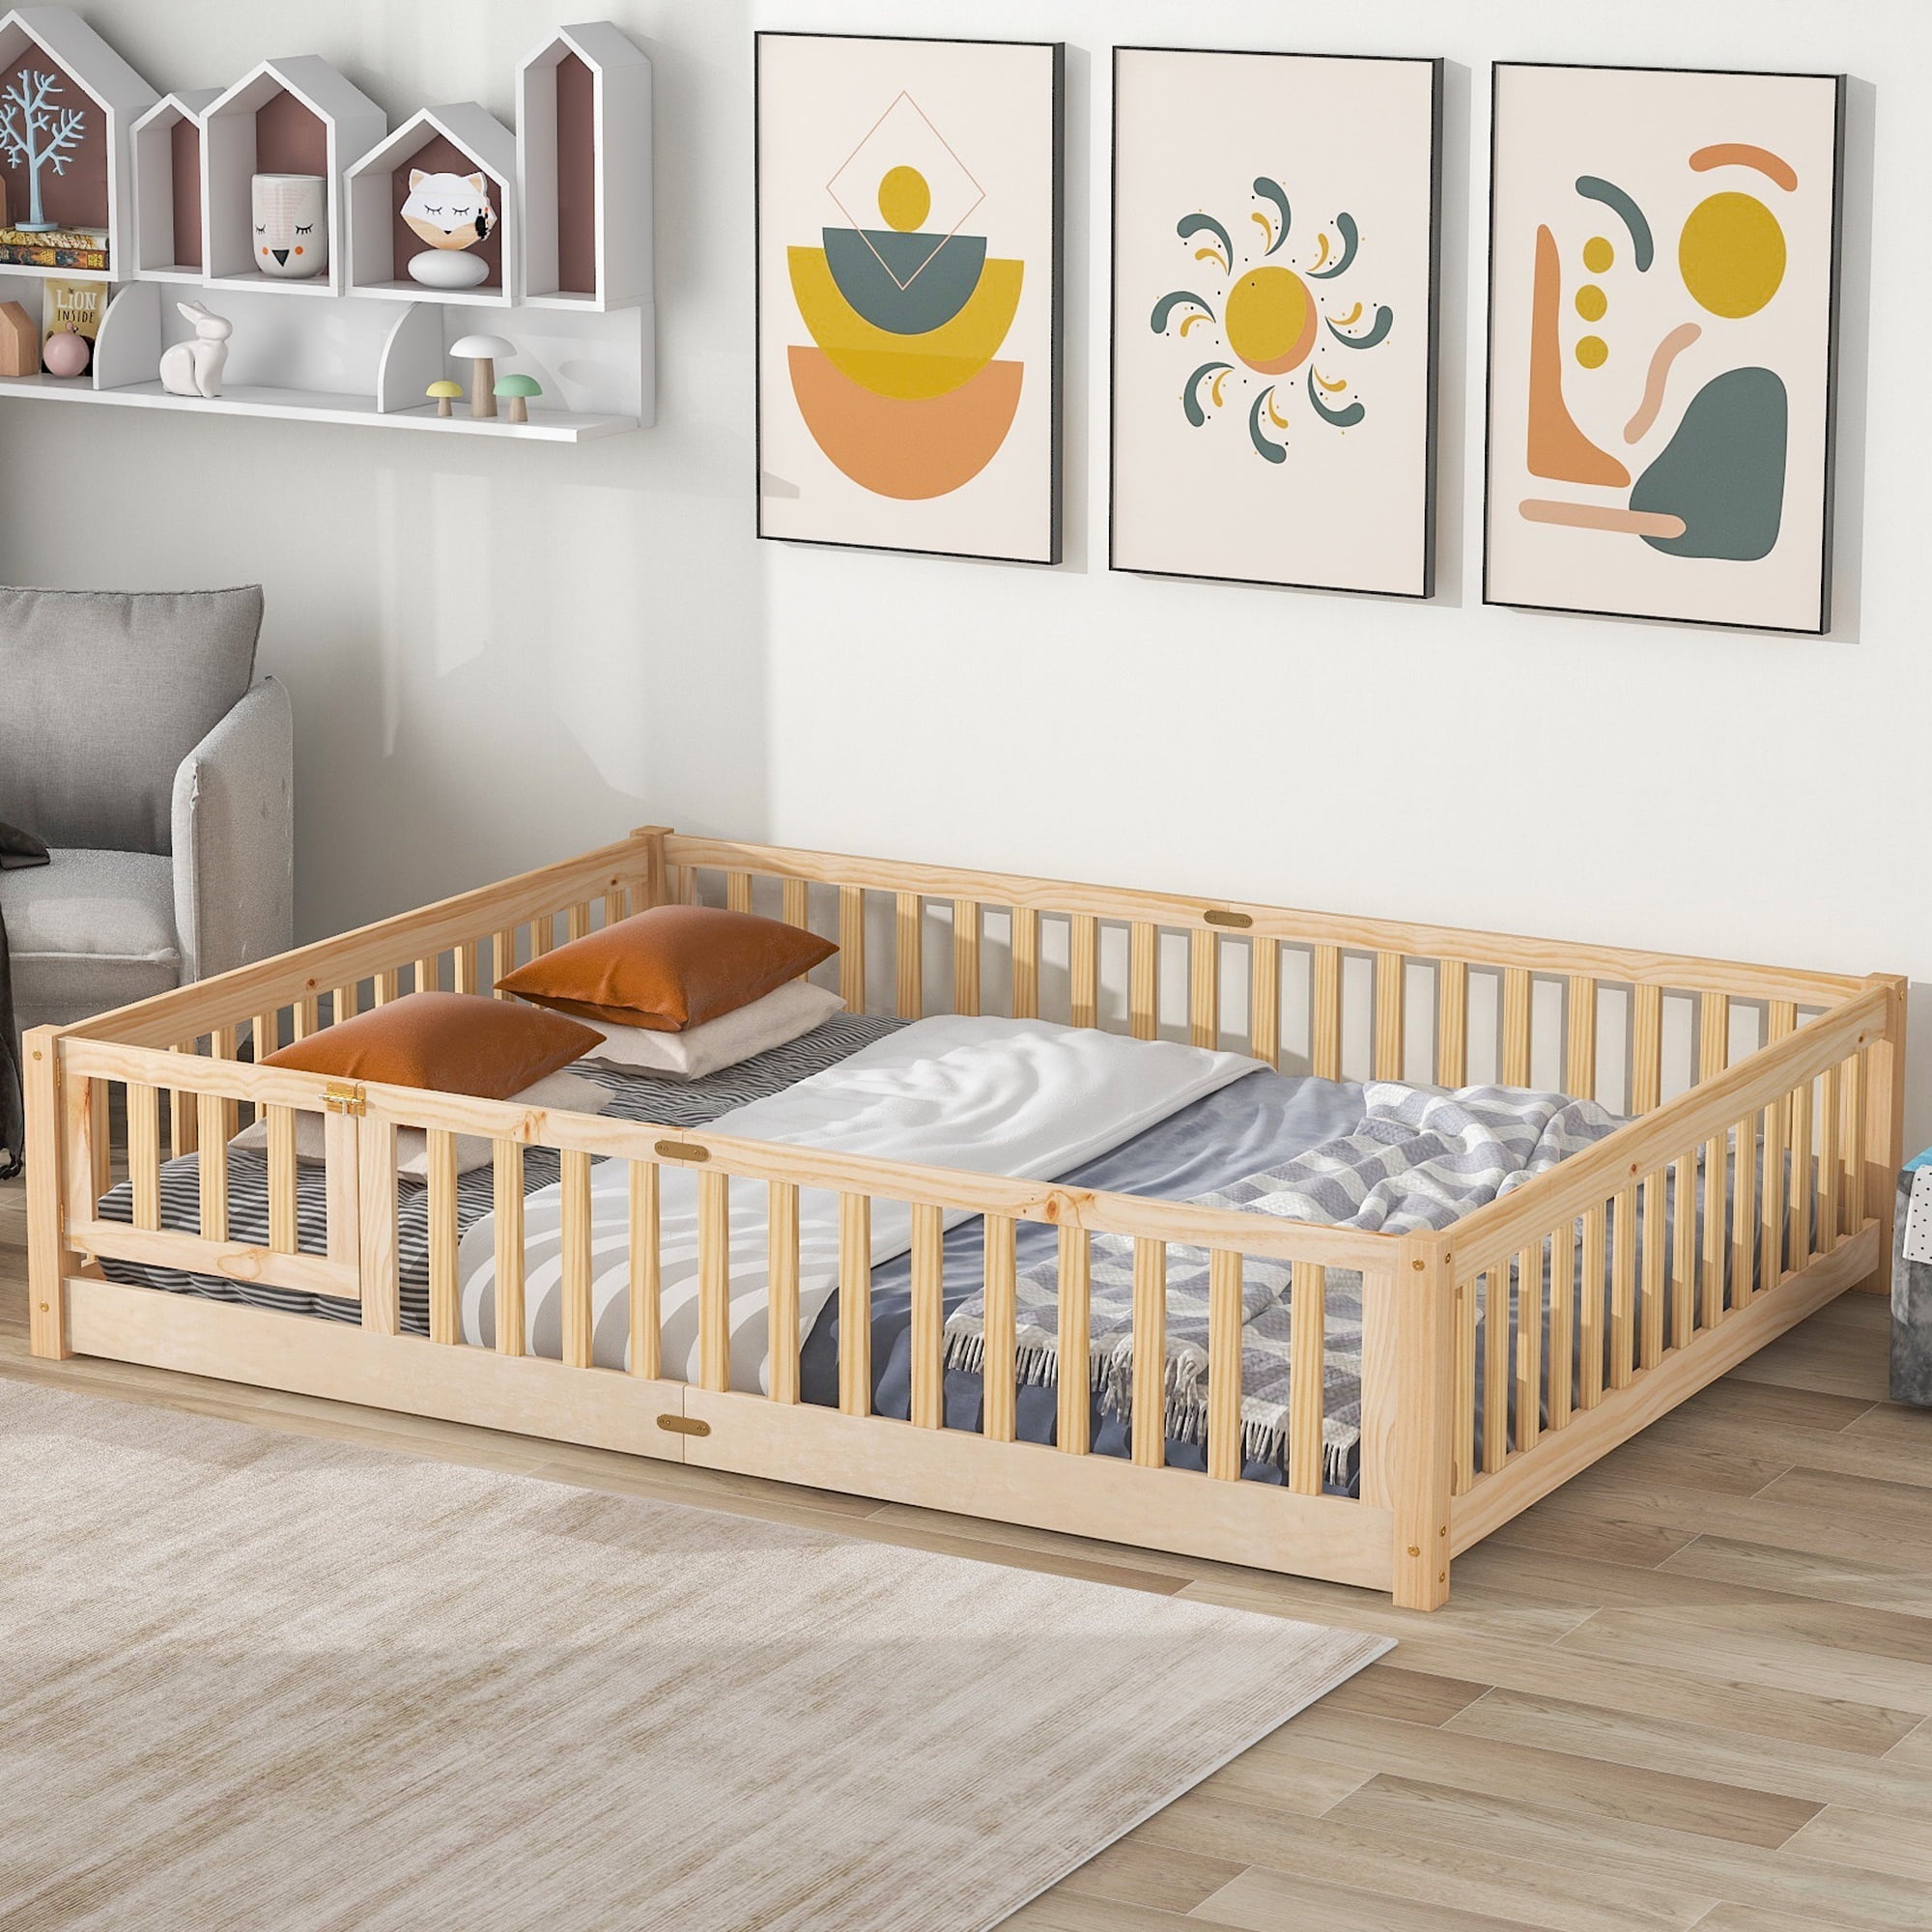 uhomepro Queen Size Wood Floor Bed Frame with Fence and Door for Kids, Toddlers, Natural